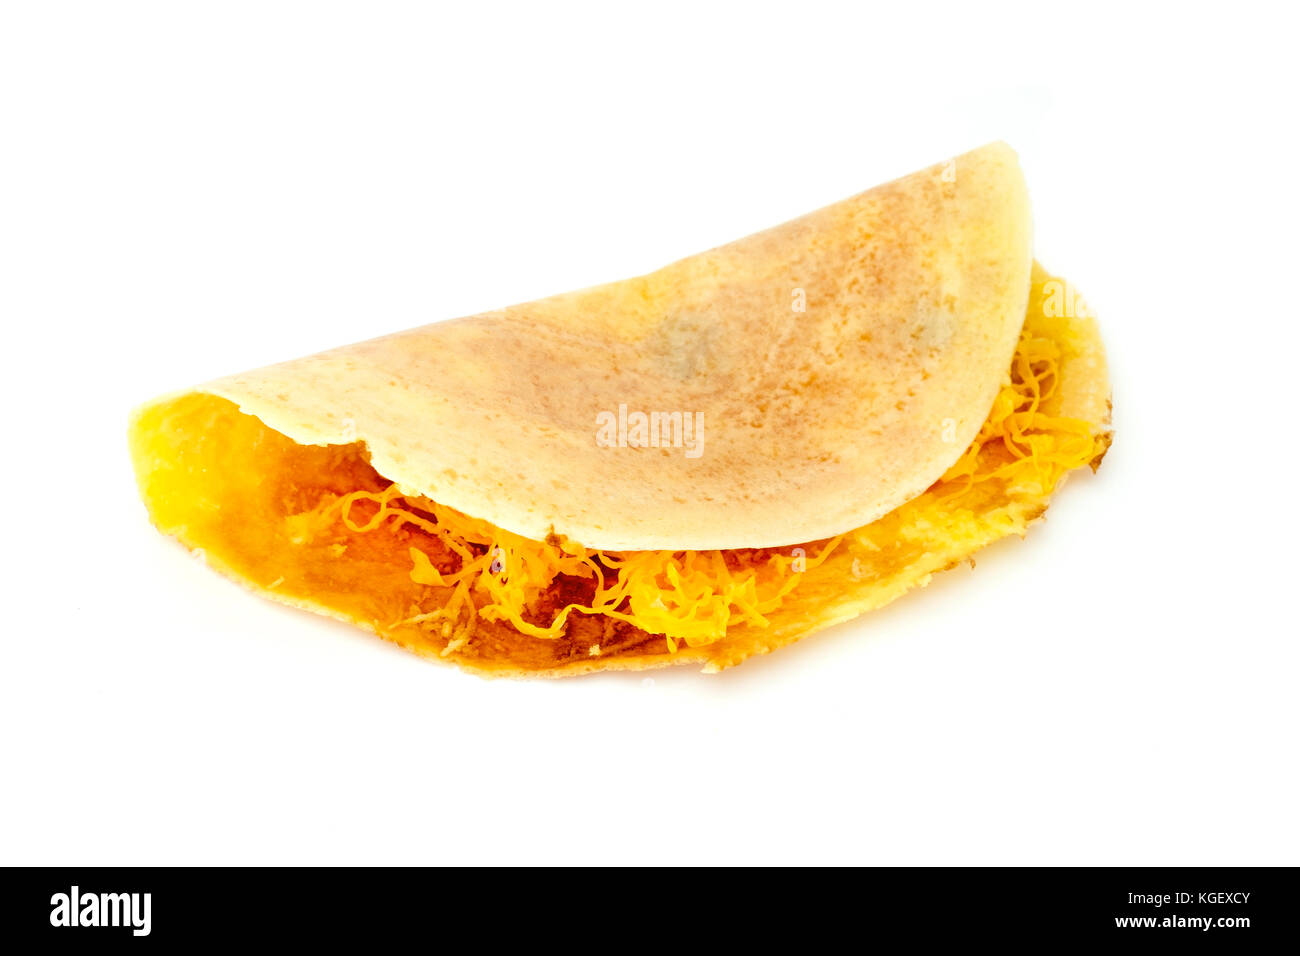 Khanom bueang, a thai tradional crepe, on a white background Stock Photo